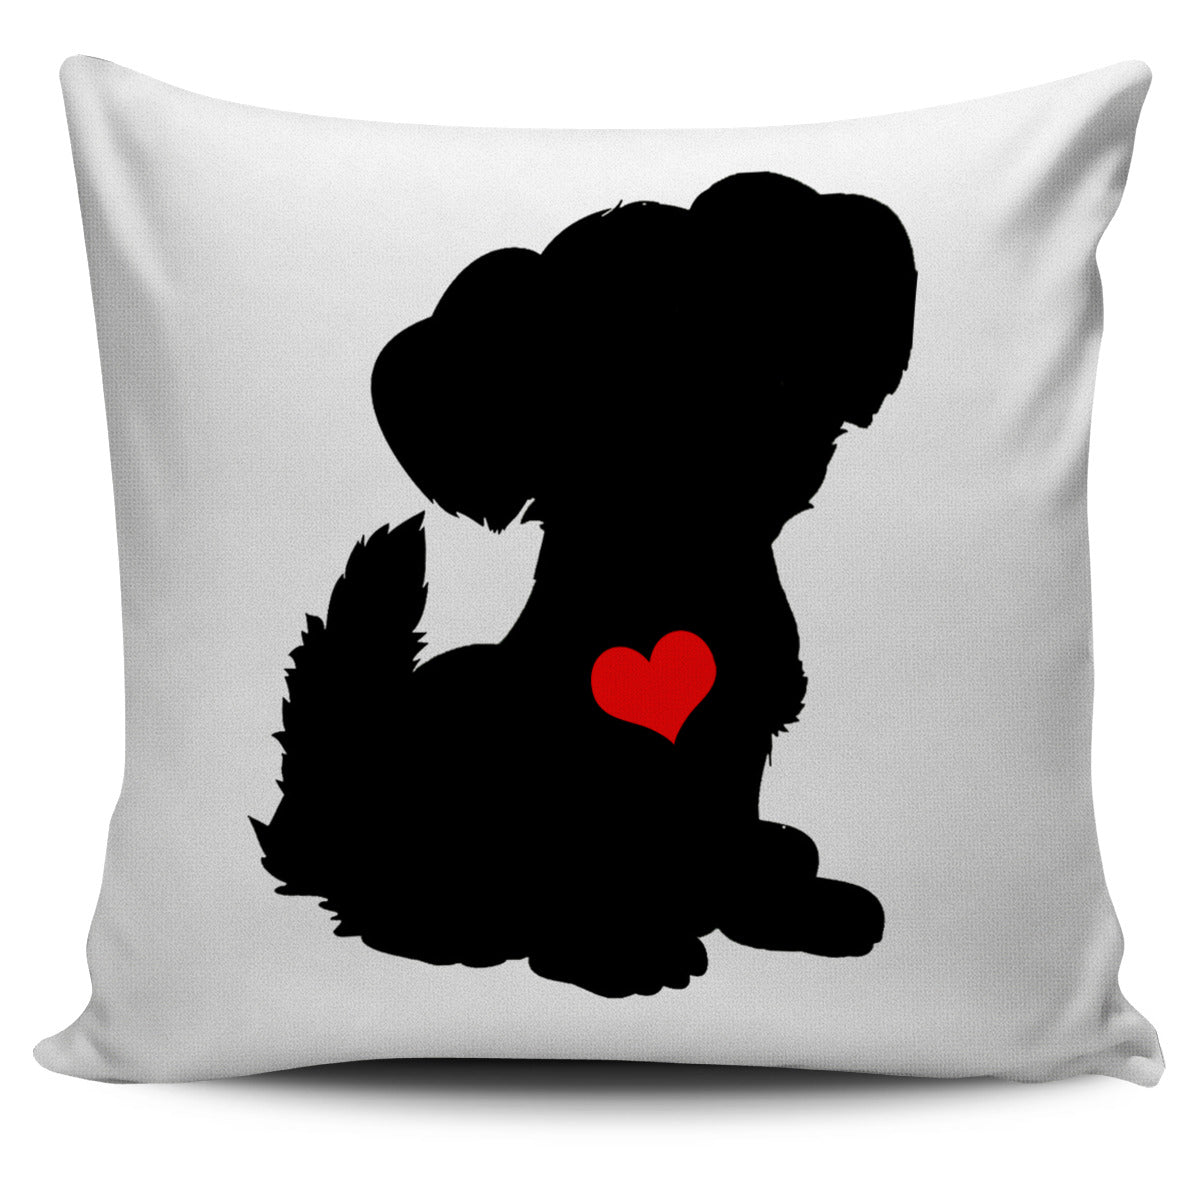 Black Dog Red Heart Pillow Cover